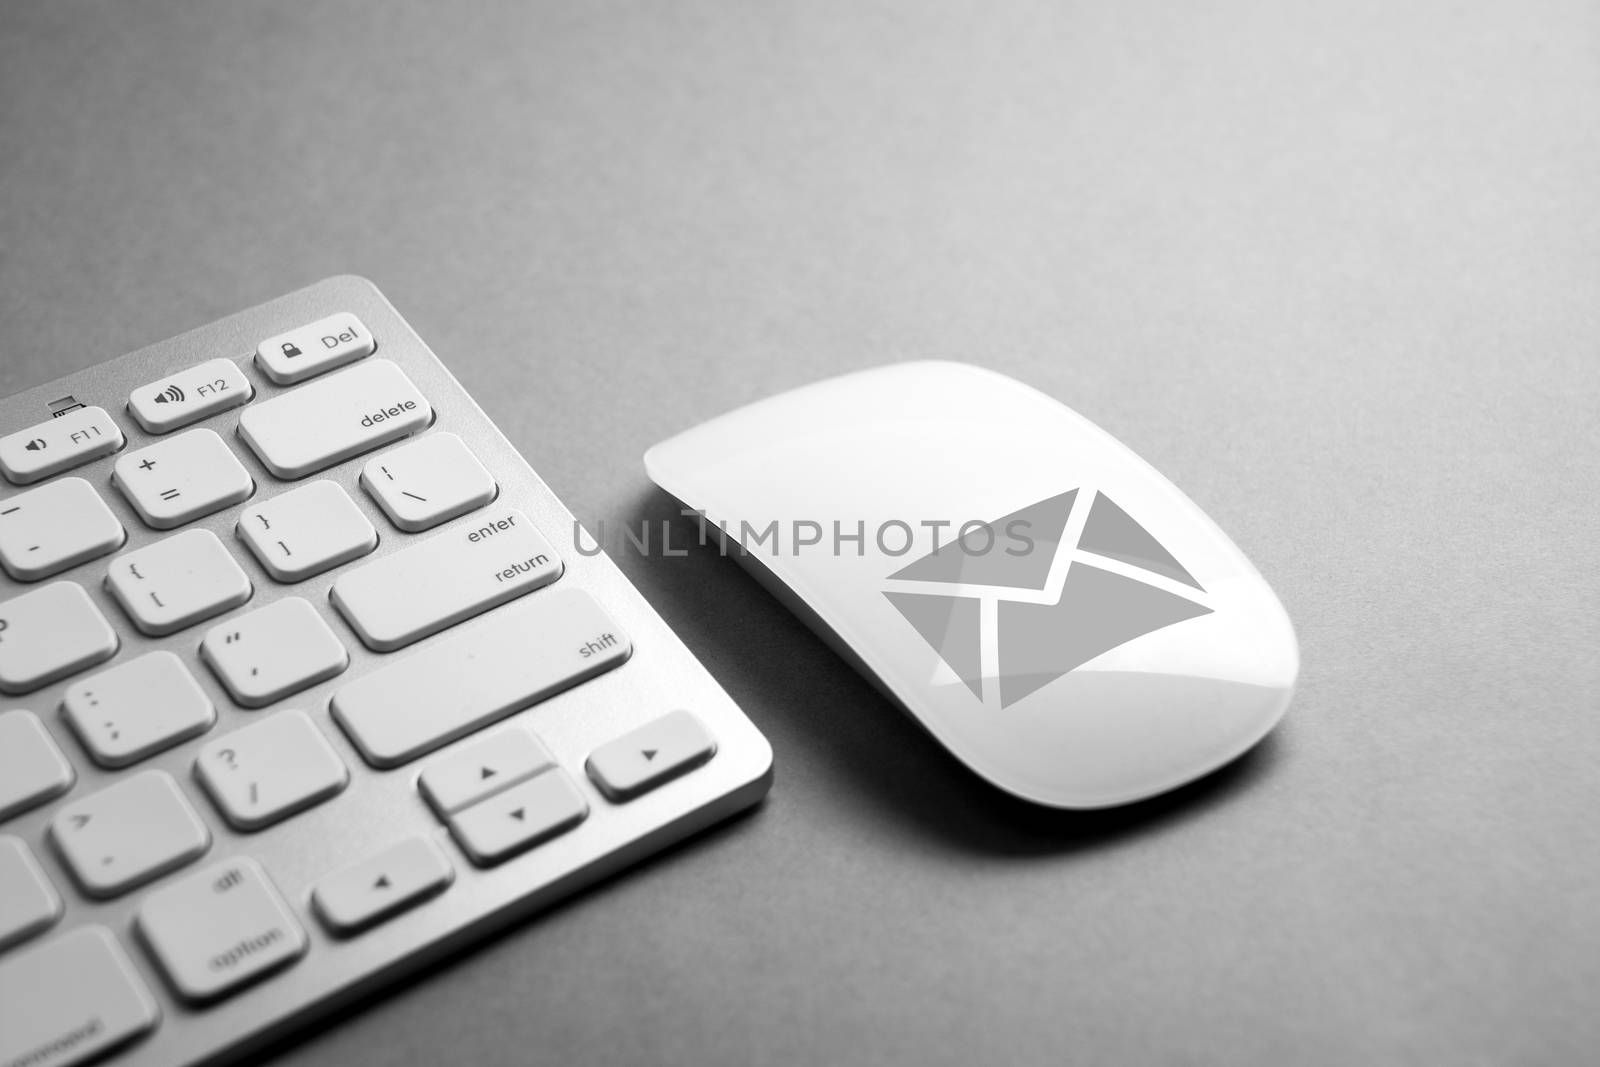 Email ,telephone, & contact us icon on computer mouse